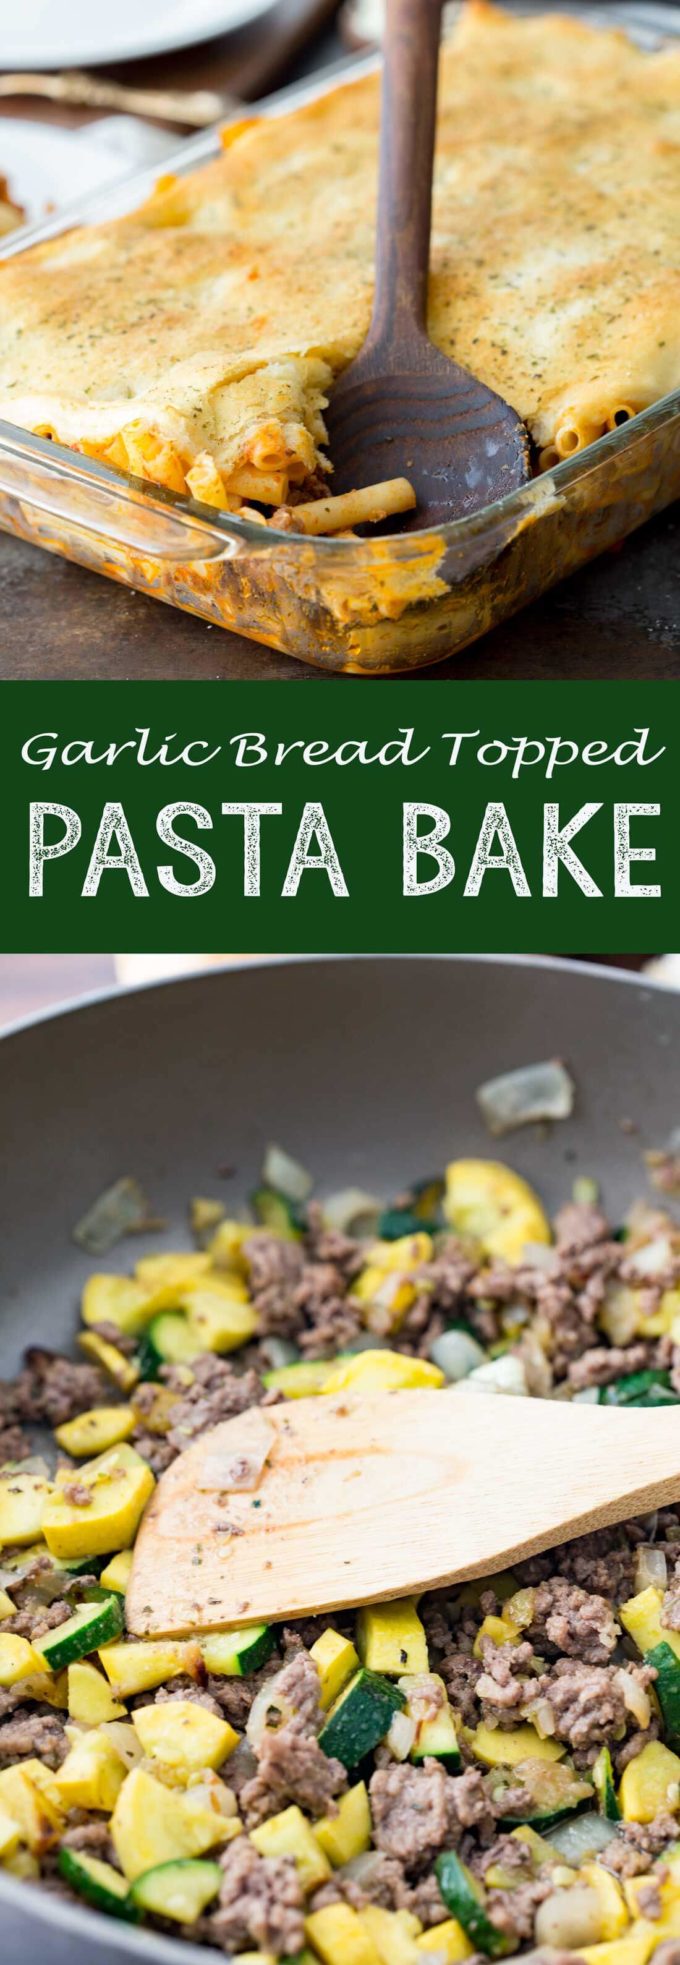 A garlic bread topped, easy pasta bake recipe with homestyle ragu and tons of delicious veggies